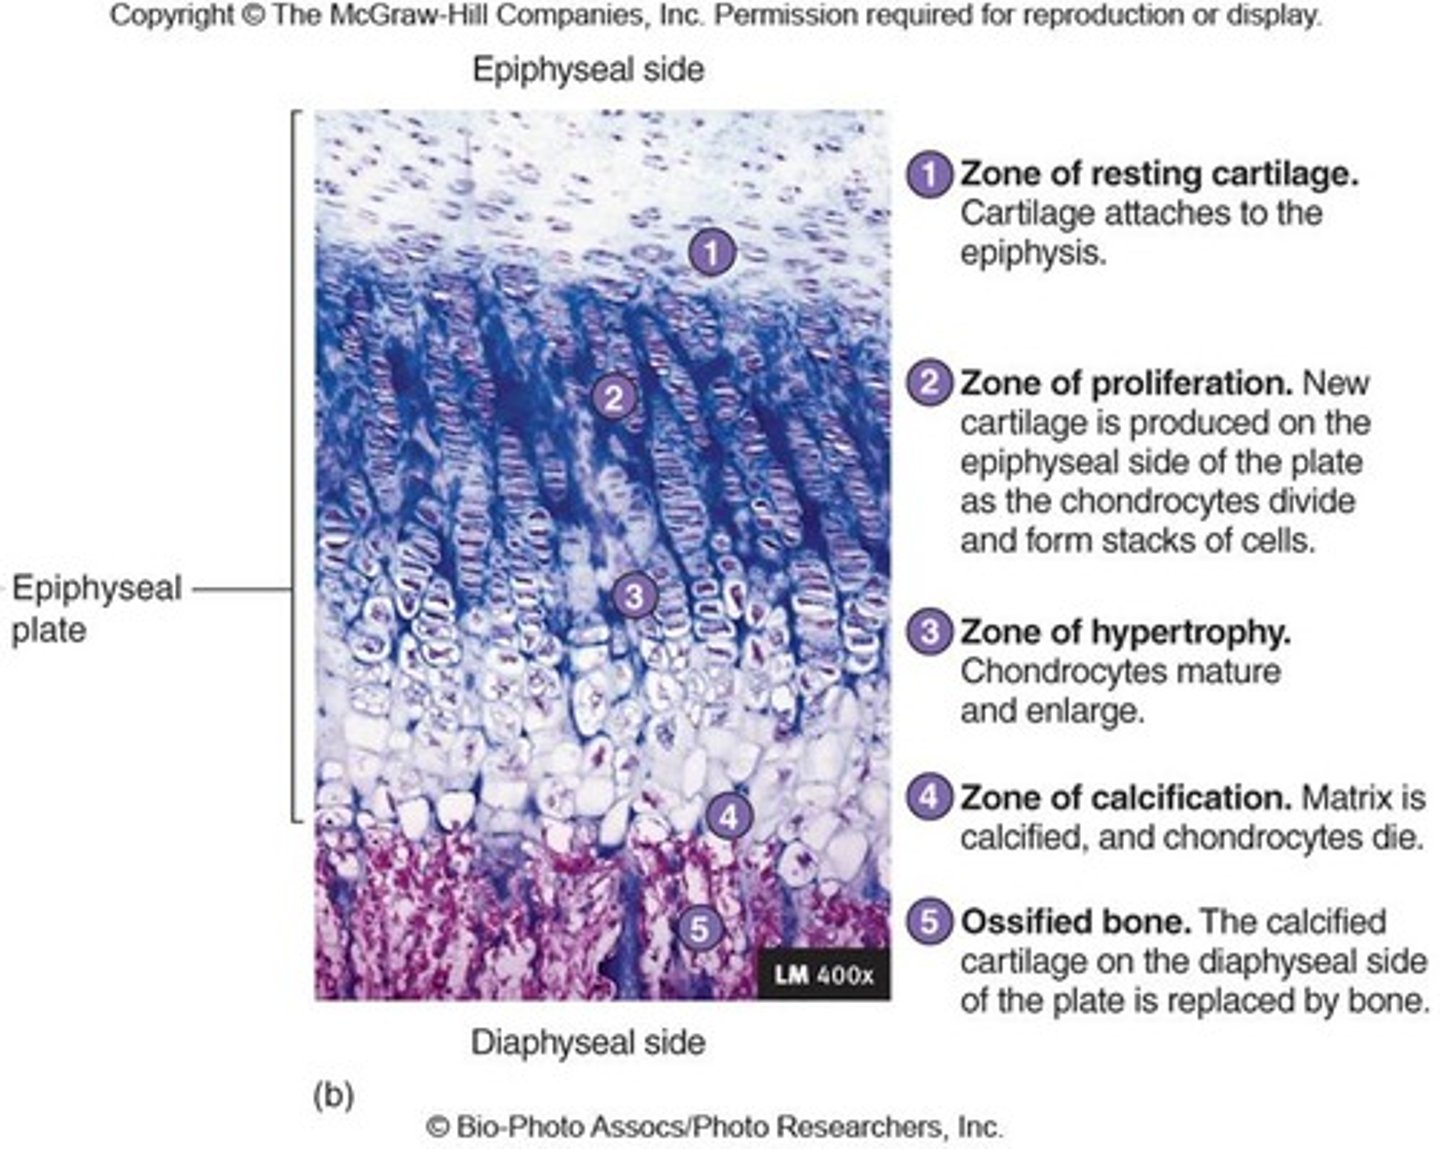 <p>- consists of large, maturing chondrocytes arranged in columns</p><p>- thickens epiphyseal plate and lengthens bone</p><p>- osteoblasts secrete calcium salts to calcify the matrix</p>